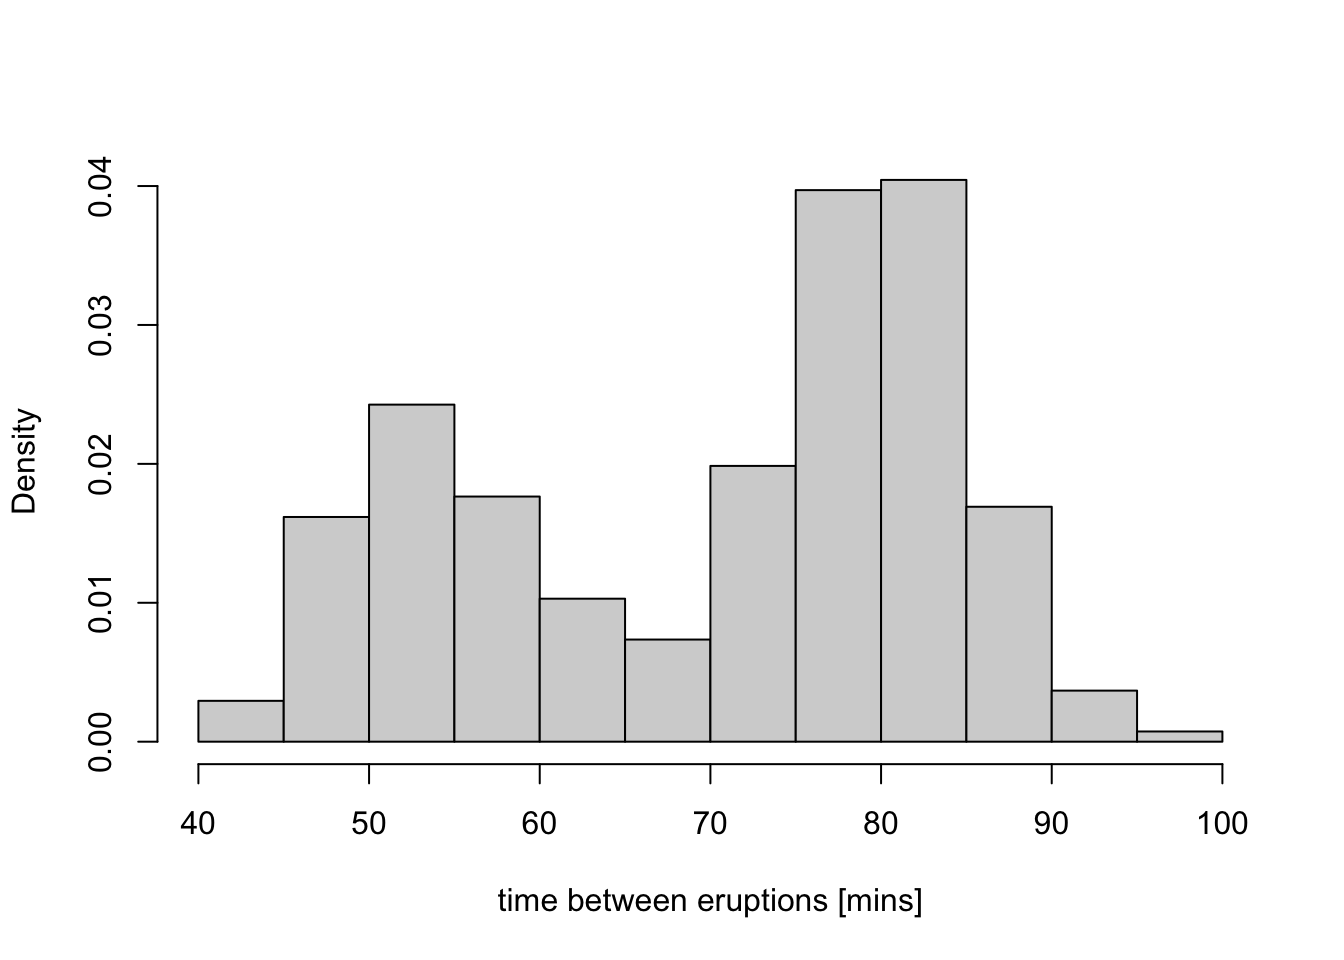 This figure shows how a histogram can be used to approximate a probability density. From the plot one can see that the density of the waiting times distribution seems to be bi-modal with peaks around 53 and 80 minutes.